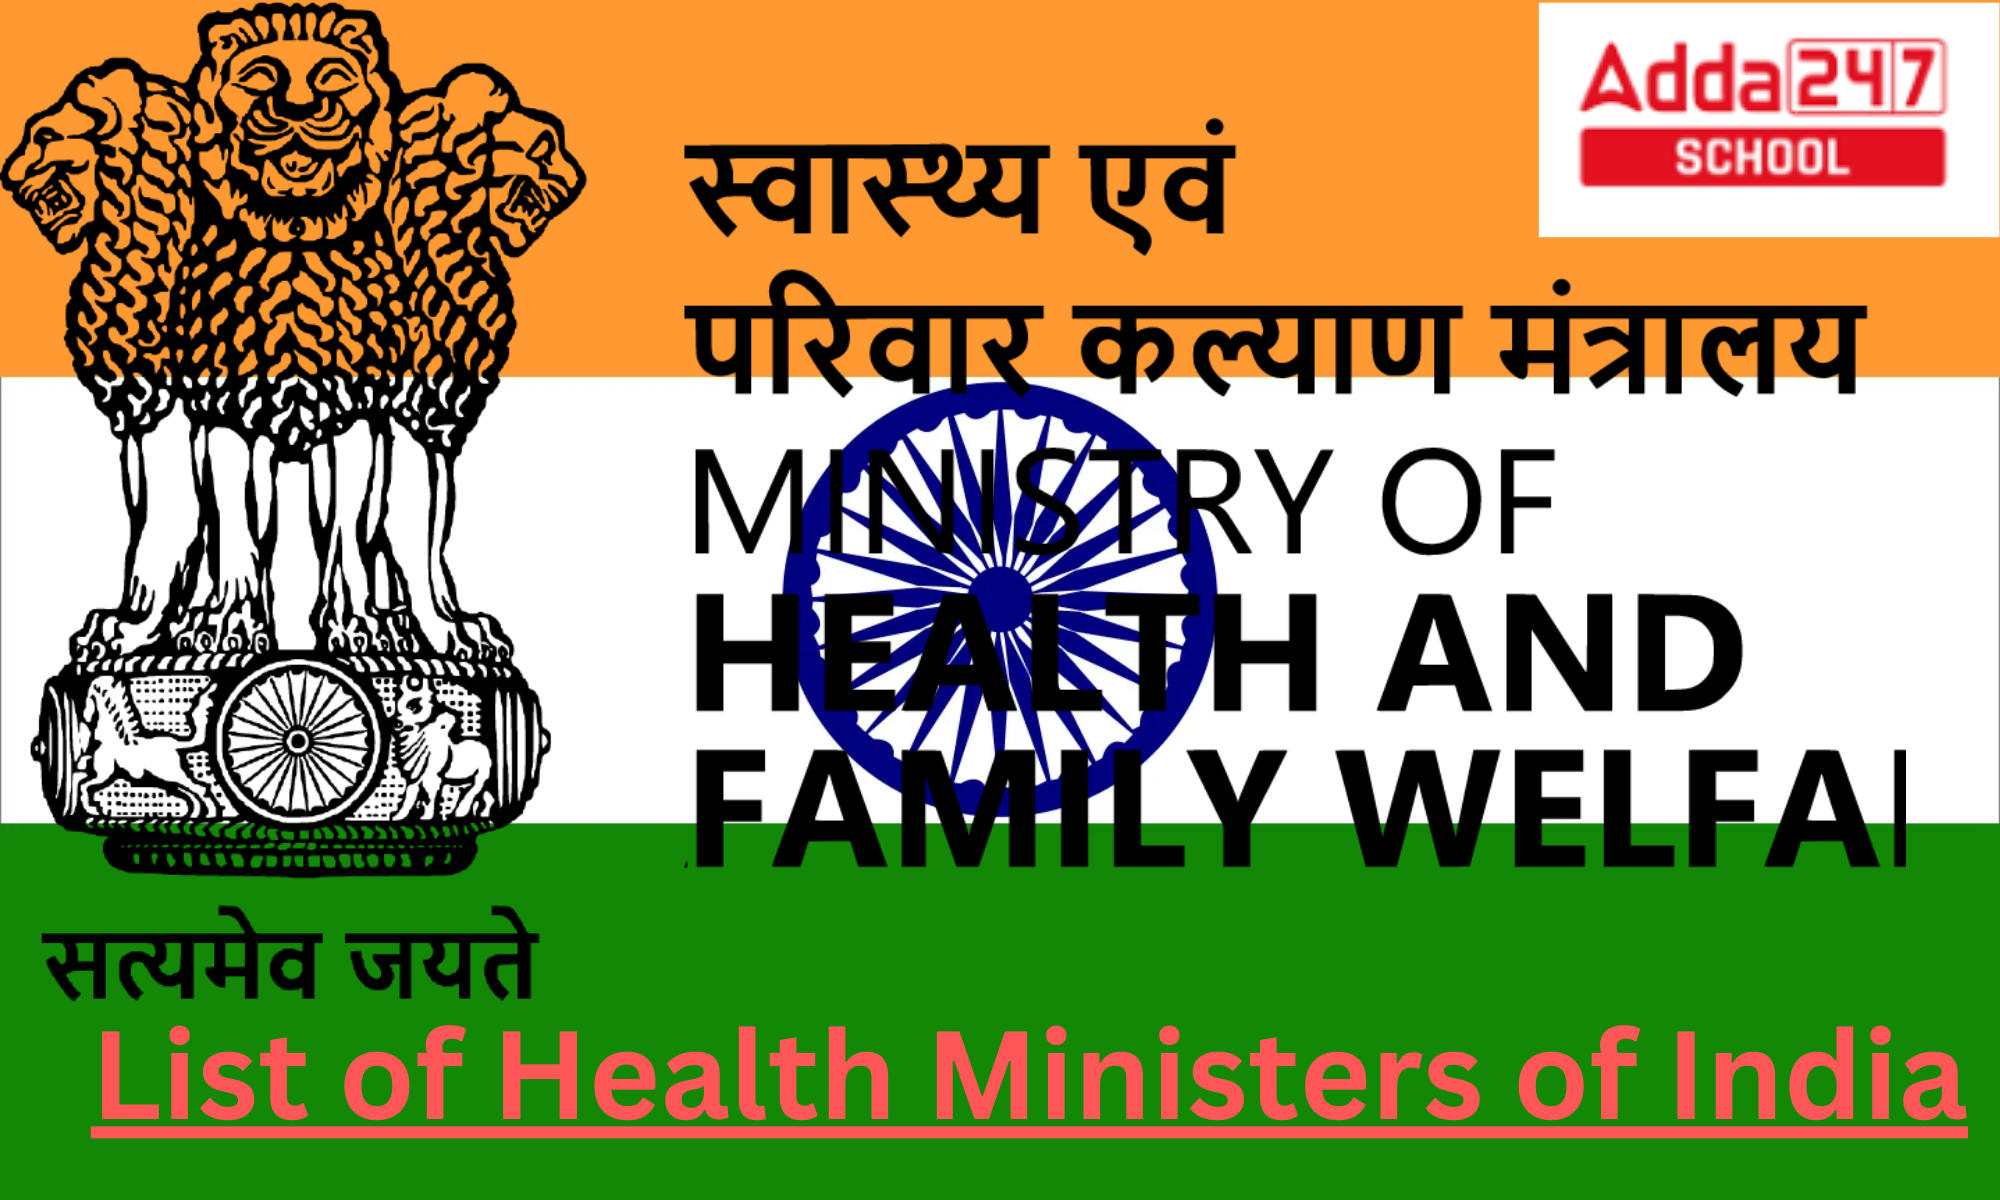 List of Health Ministers of India